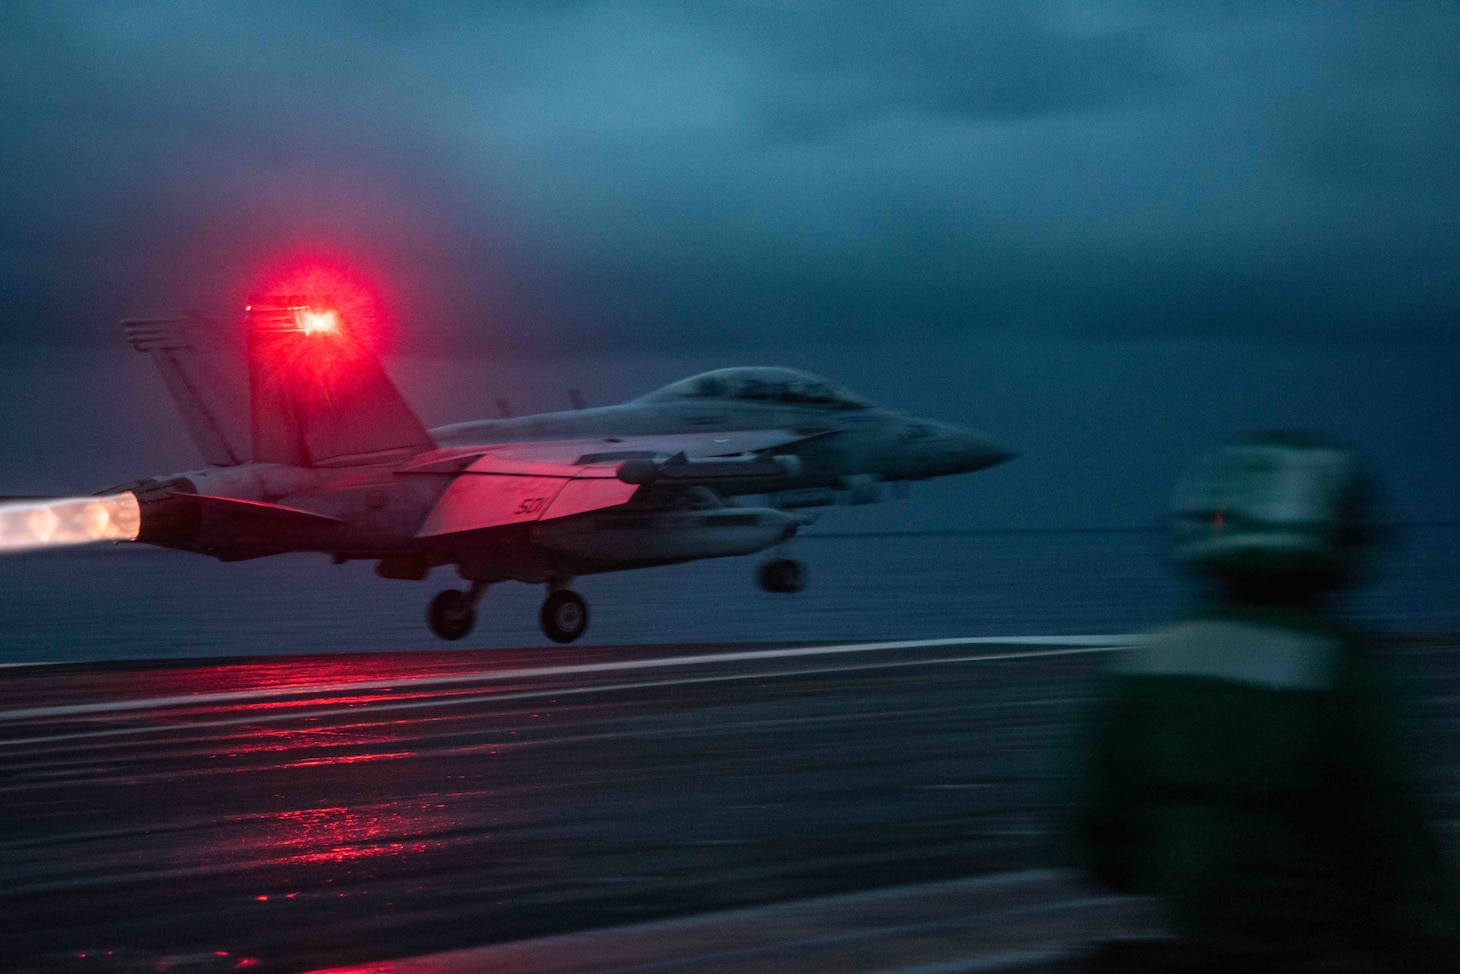 210614-N-WS494-1064 SOUTH CHINA SEA (June 14, 2021) An EA-18G Growler attached to the Shadowhawks of Electronic Attack Squadron (VAQ) 141 launches from the flight deck of the U.S. Navy’s only forward-deployed aircraft carrier USS Ronald Reagan (CVN 76). Ronald Reagan, the flagship of Carrier Strike Group 5, provides a combat-ready force that protects and defends the United States, as well as the collective maritime interests of its allies and partners in the Indo-Pacific region. (U.S. Navy photo by Mass Communication Specialist 3rd Class Quinton Lee)